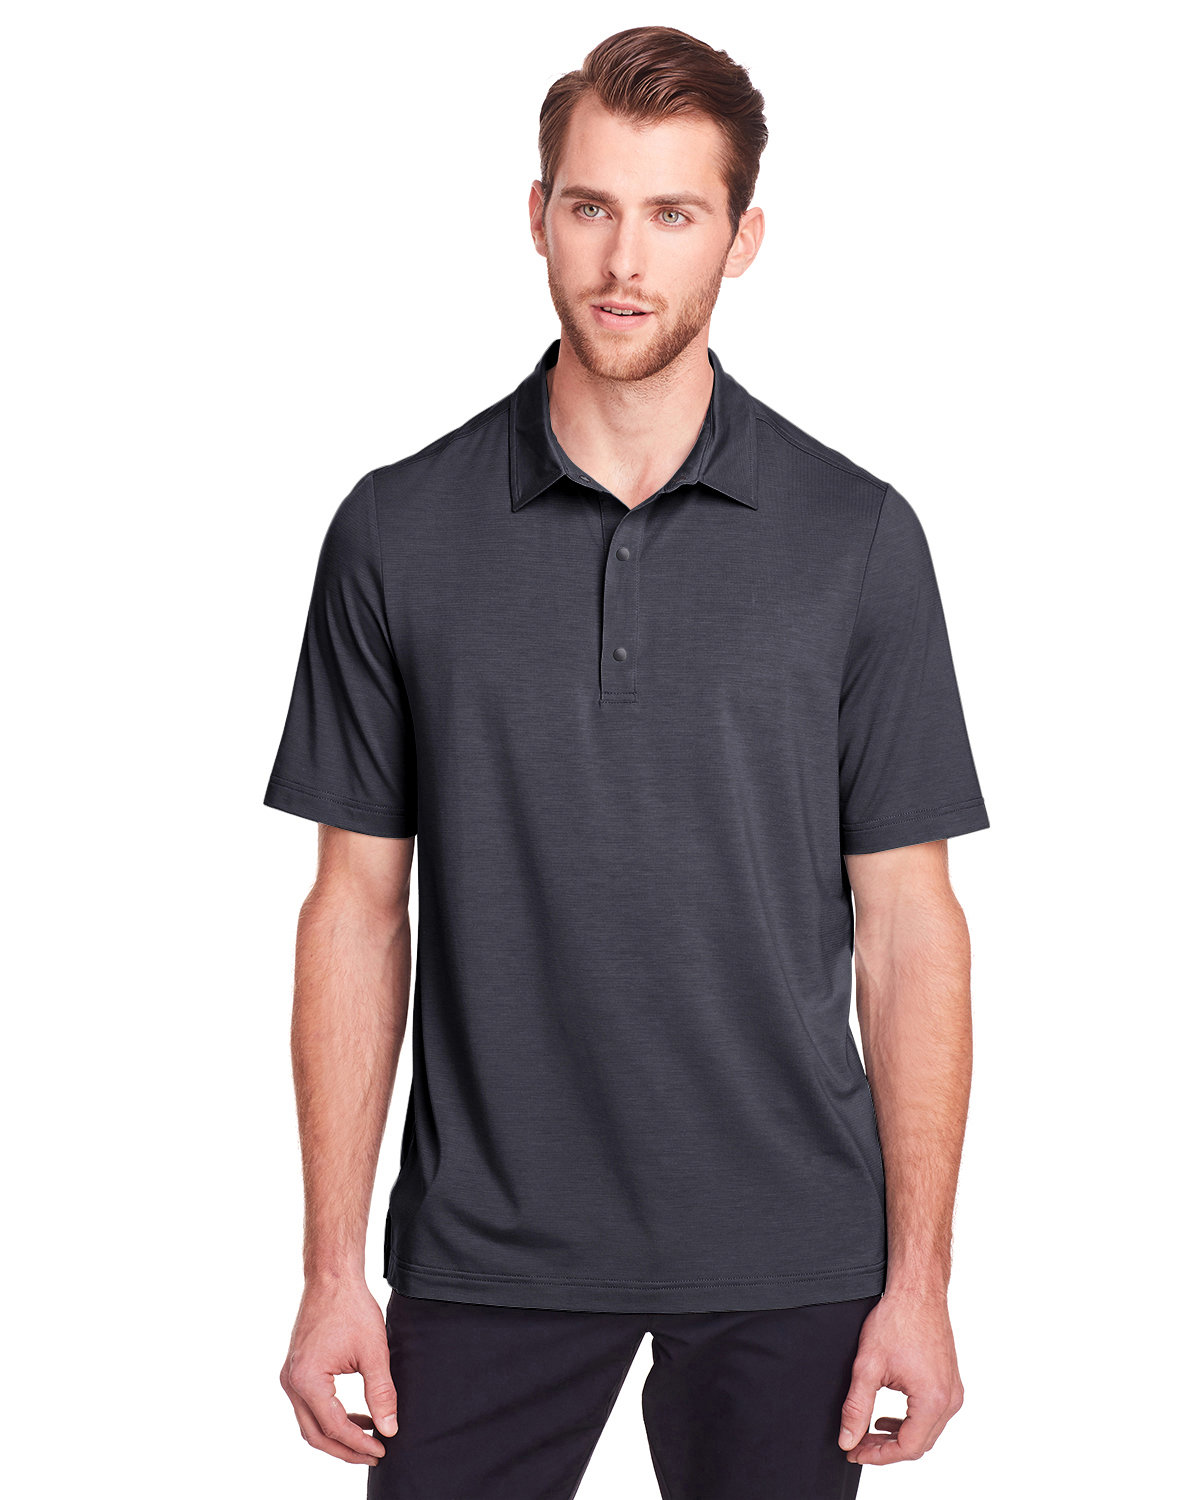 North End Men's Jaq Snap-Up Stretch Performance Polo CARBON 